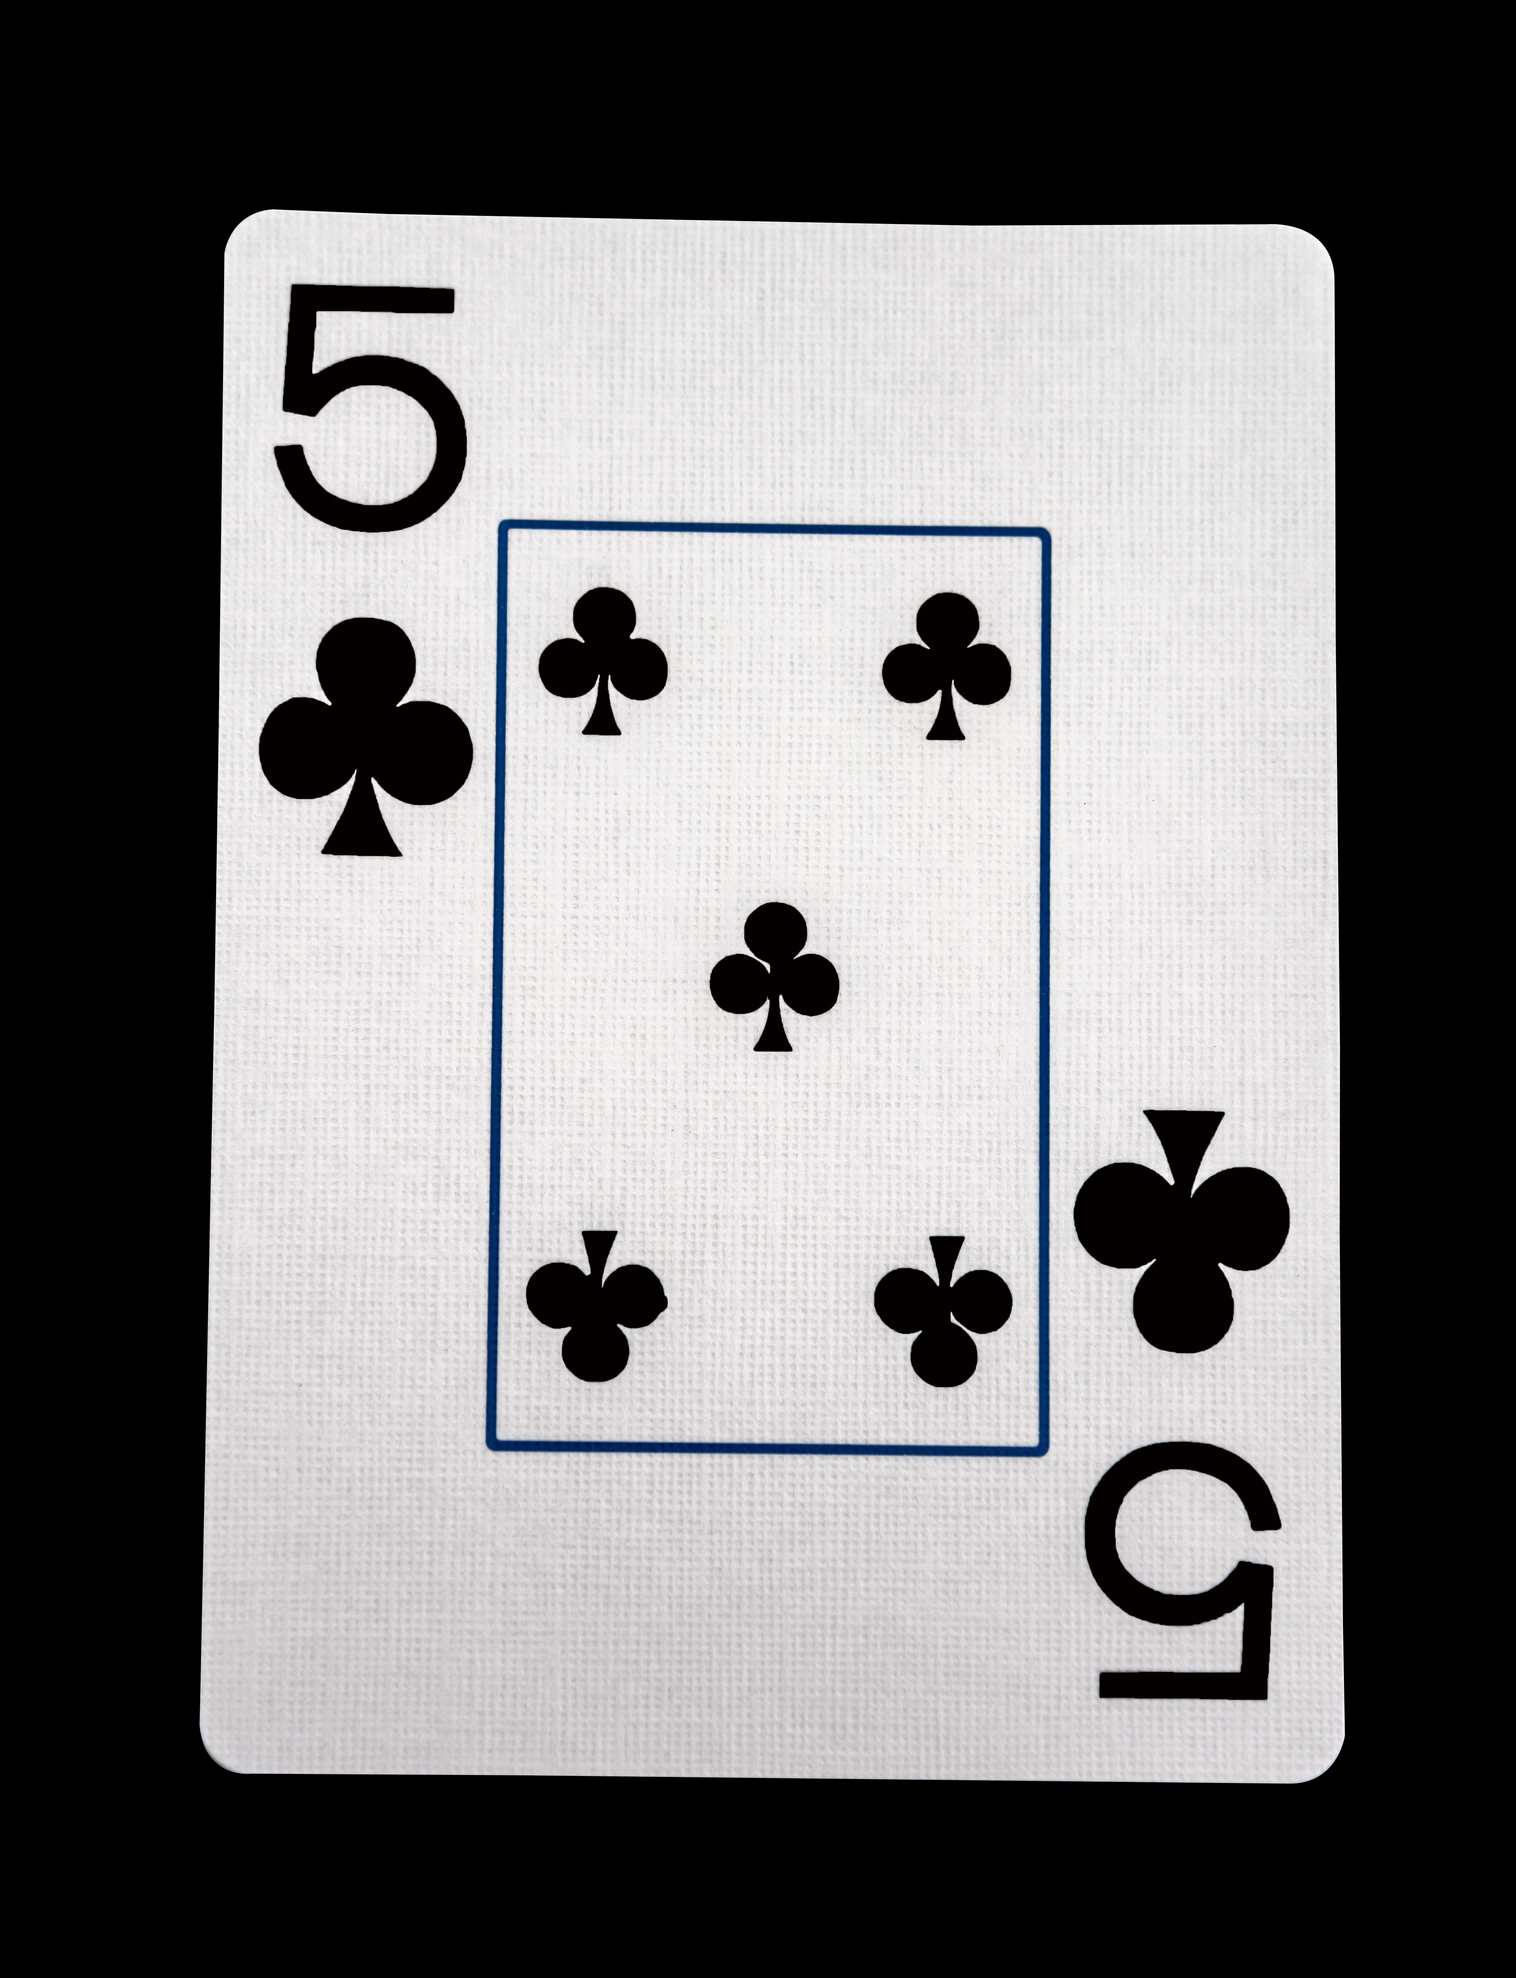 a 5 of clubs